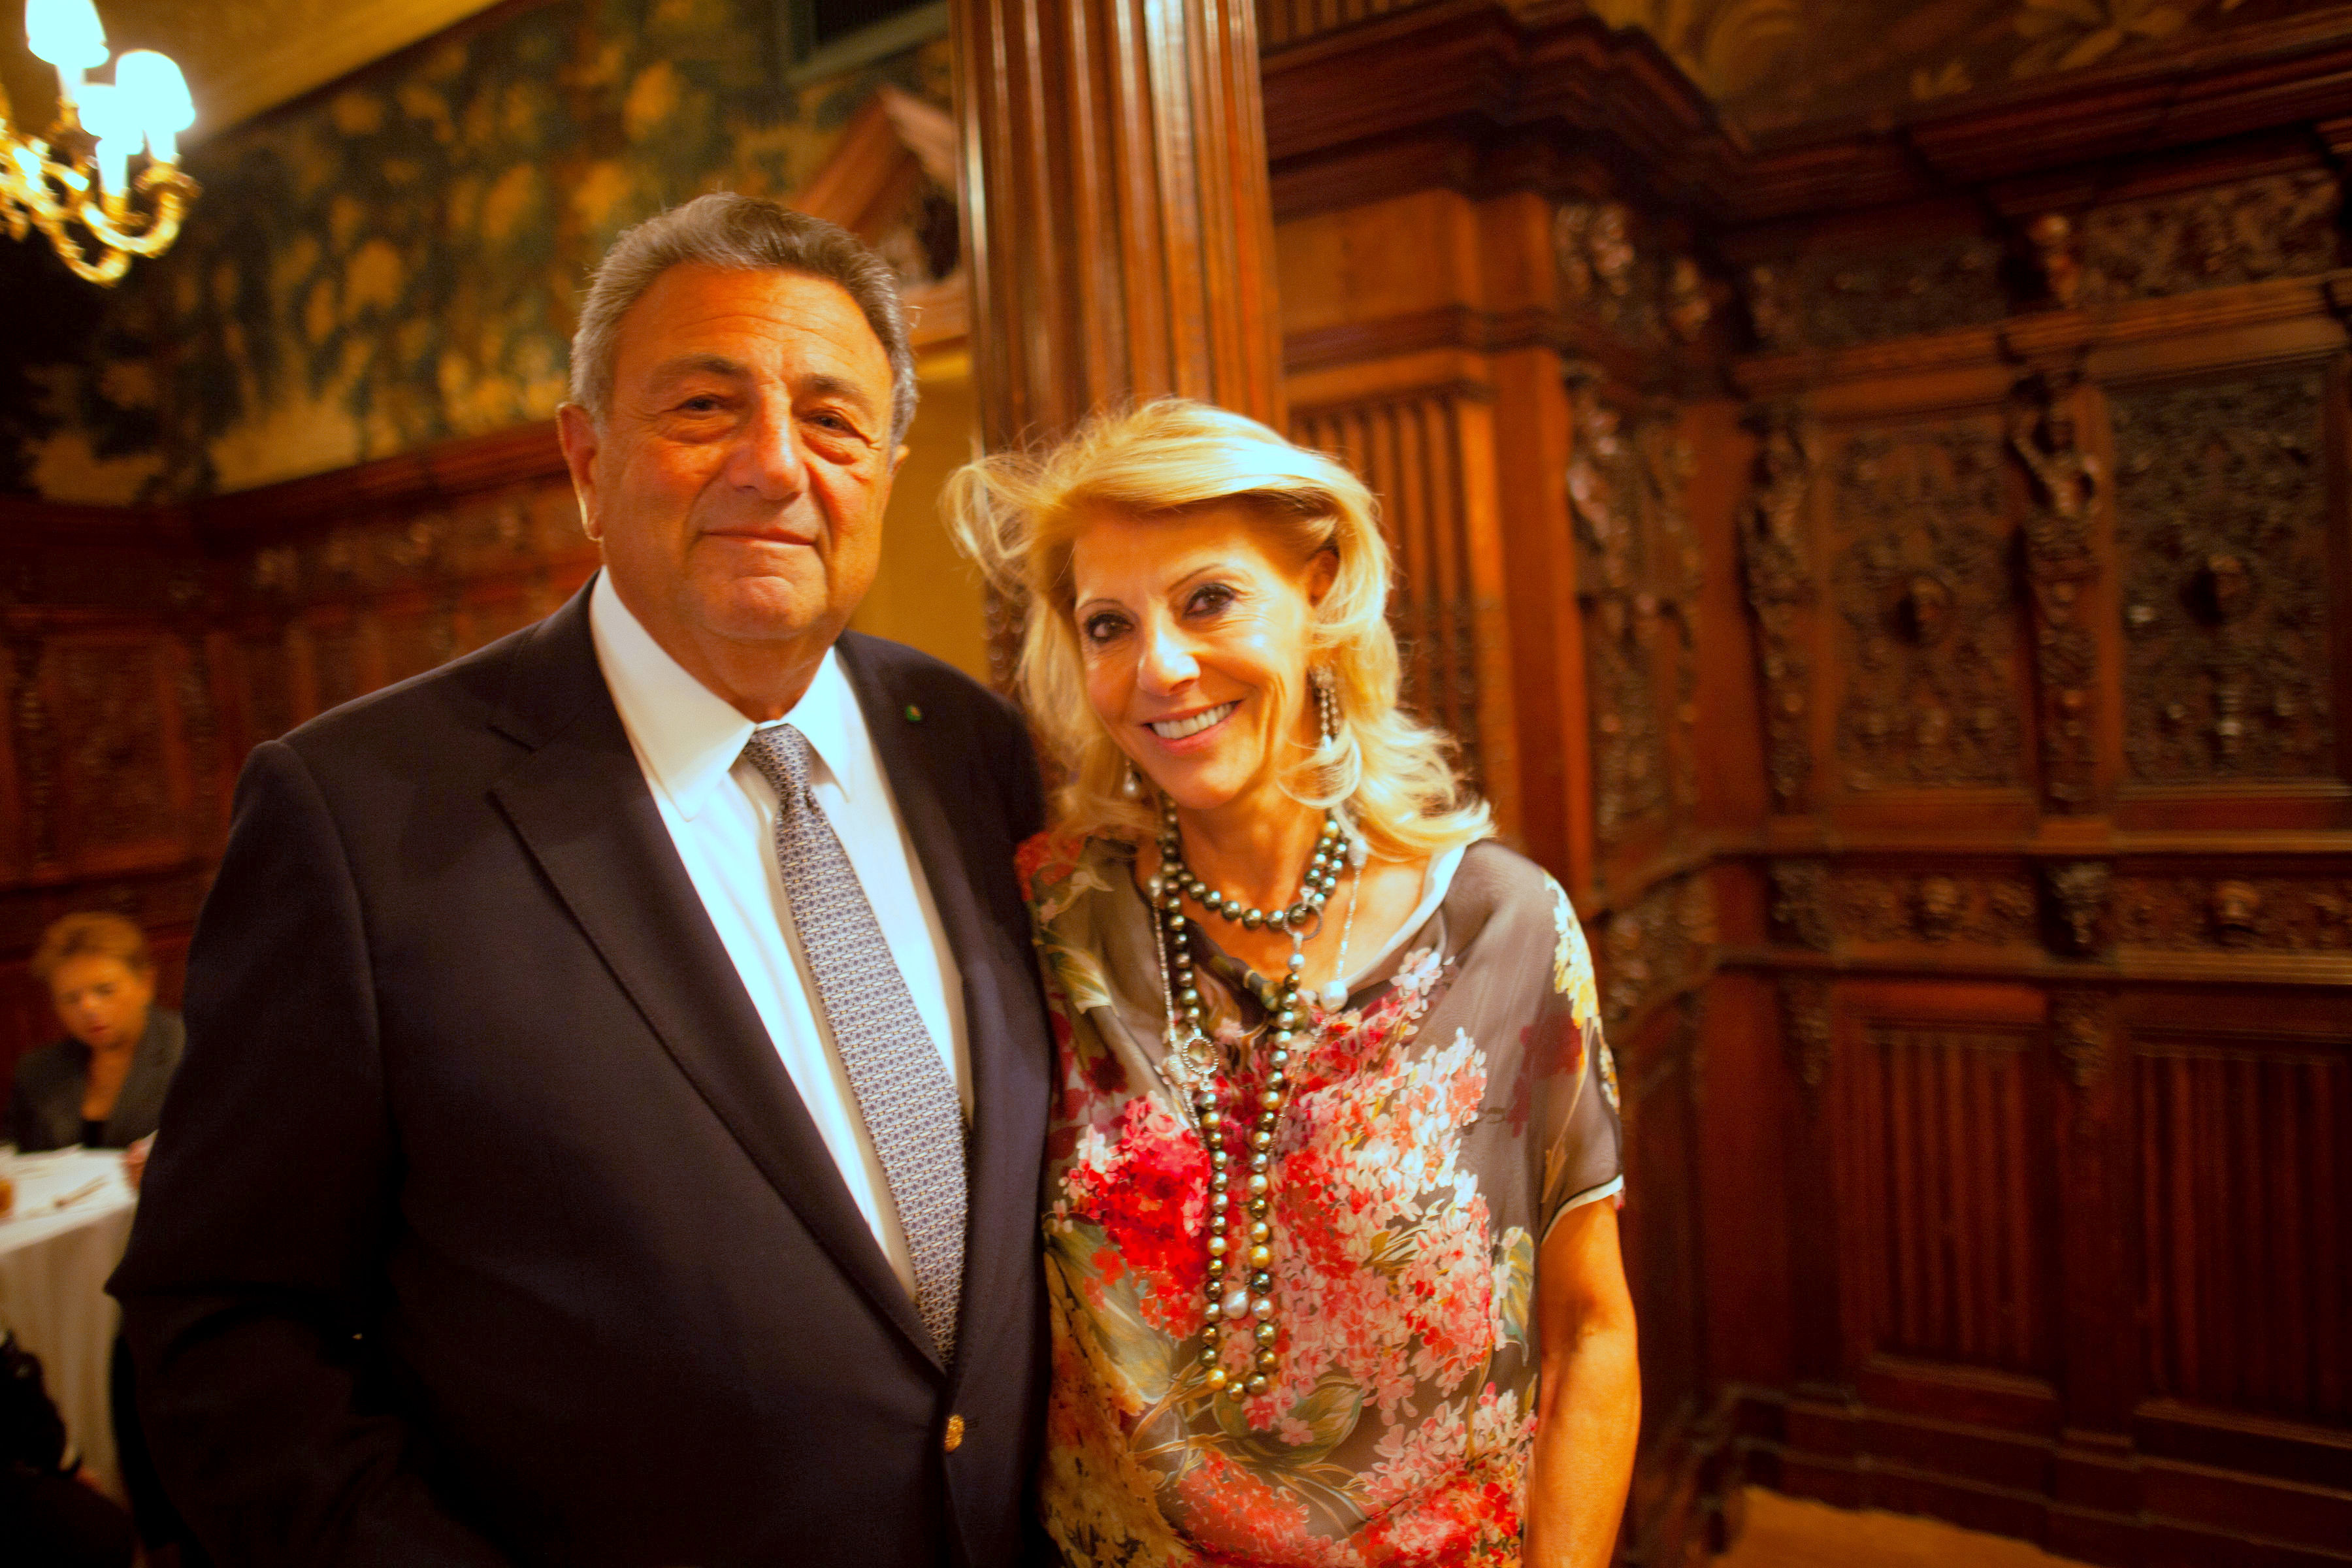 Benefactor and Savoy Foundation Board Member Frank J. Desiderio, Esq. with Event Chair, Patron and Savoy Foundation Board Member Vivian Cardia